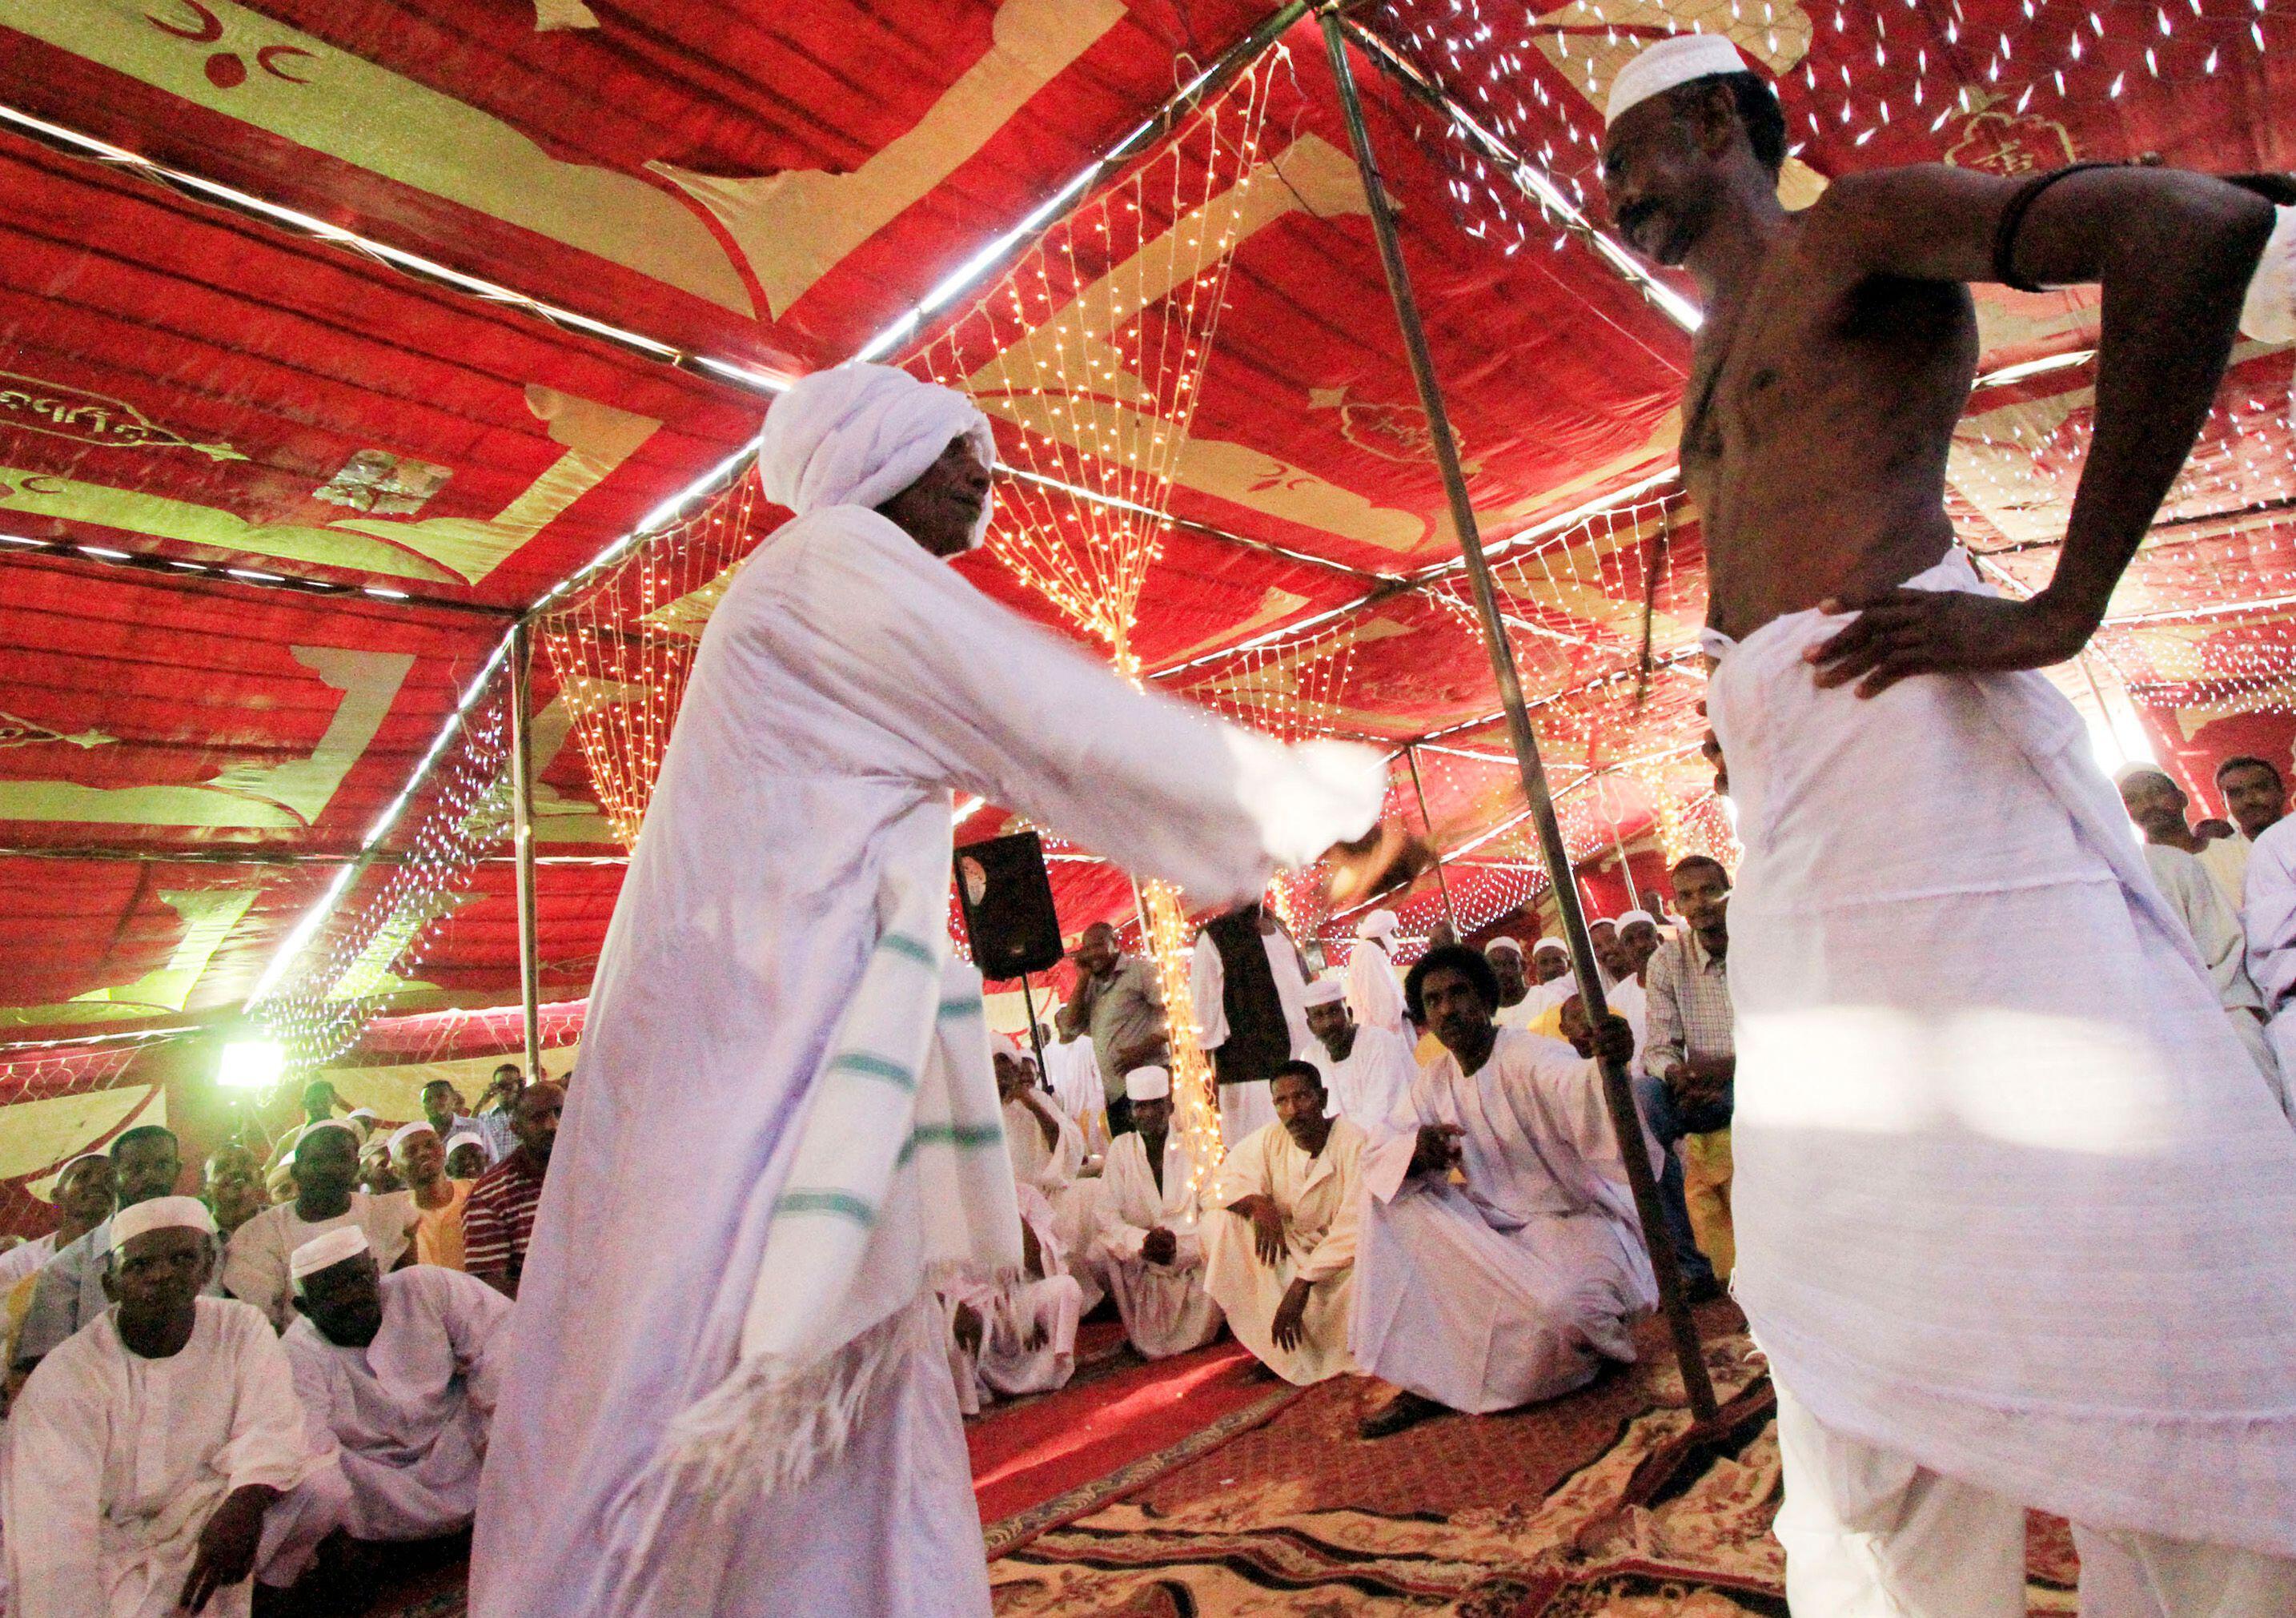 A man whips another during a traditional ceremony at a wedding